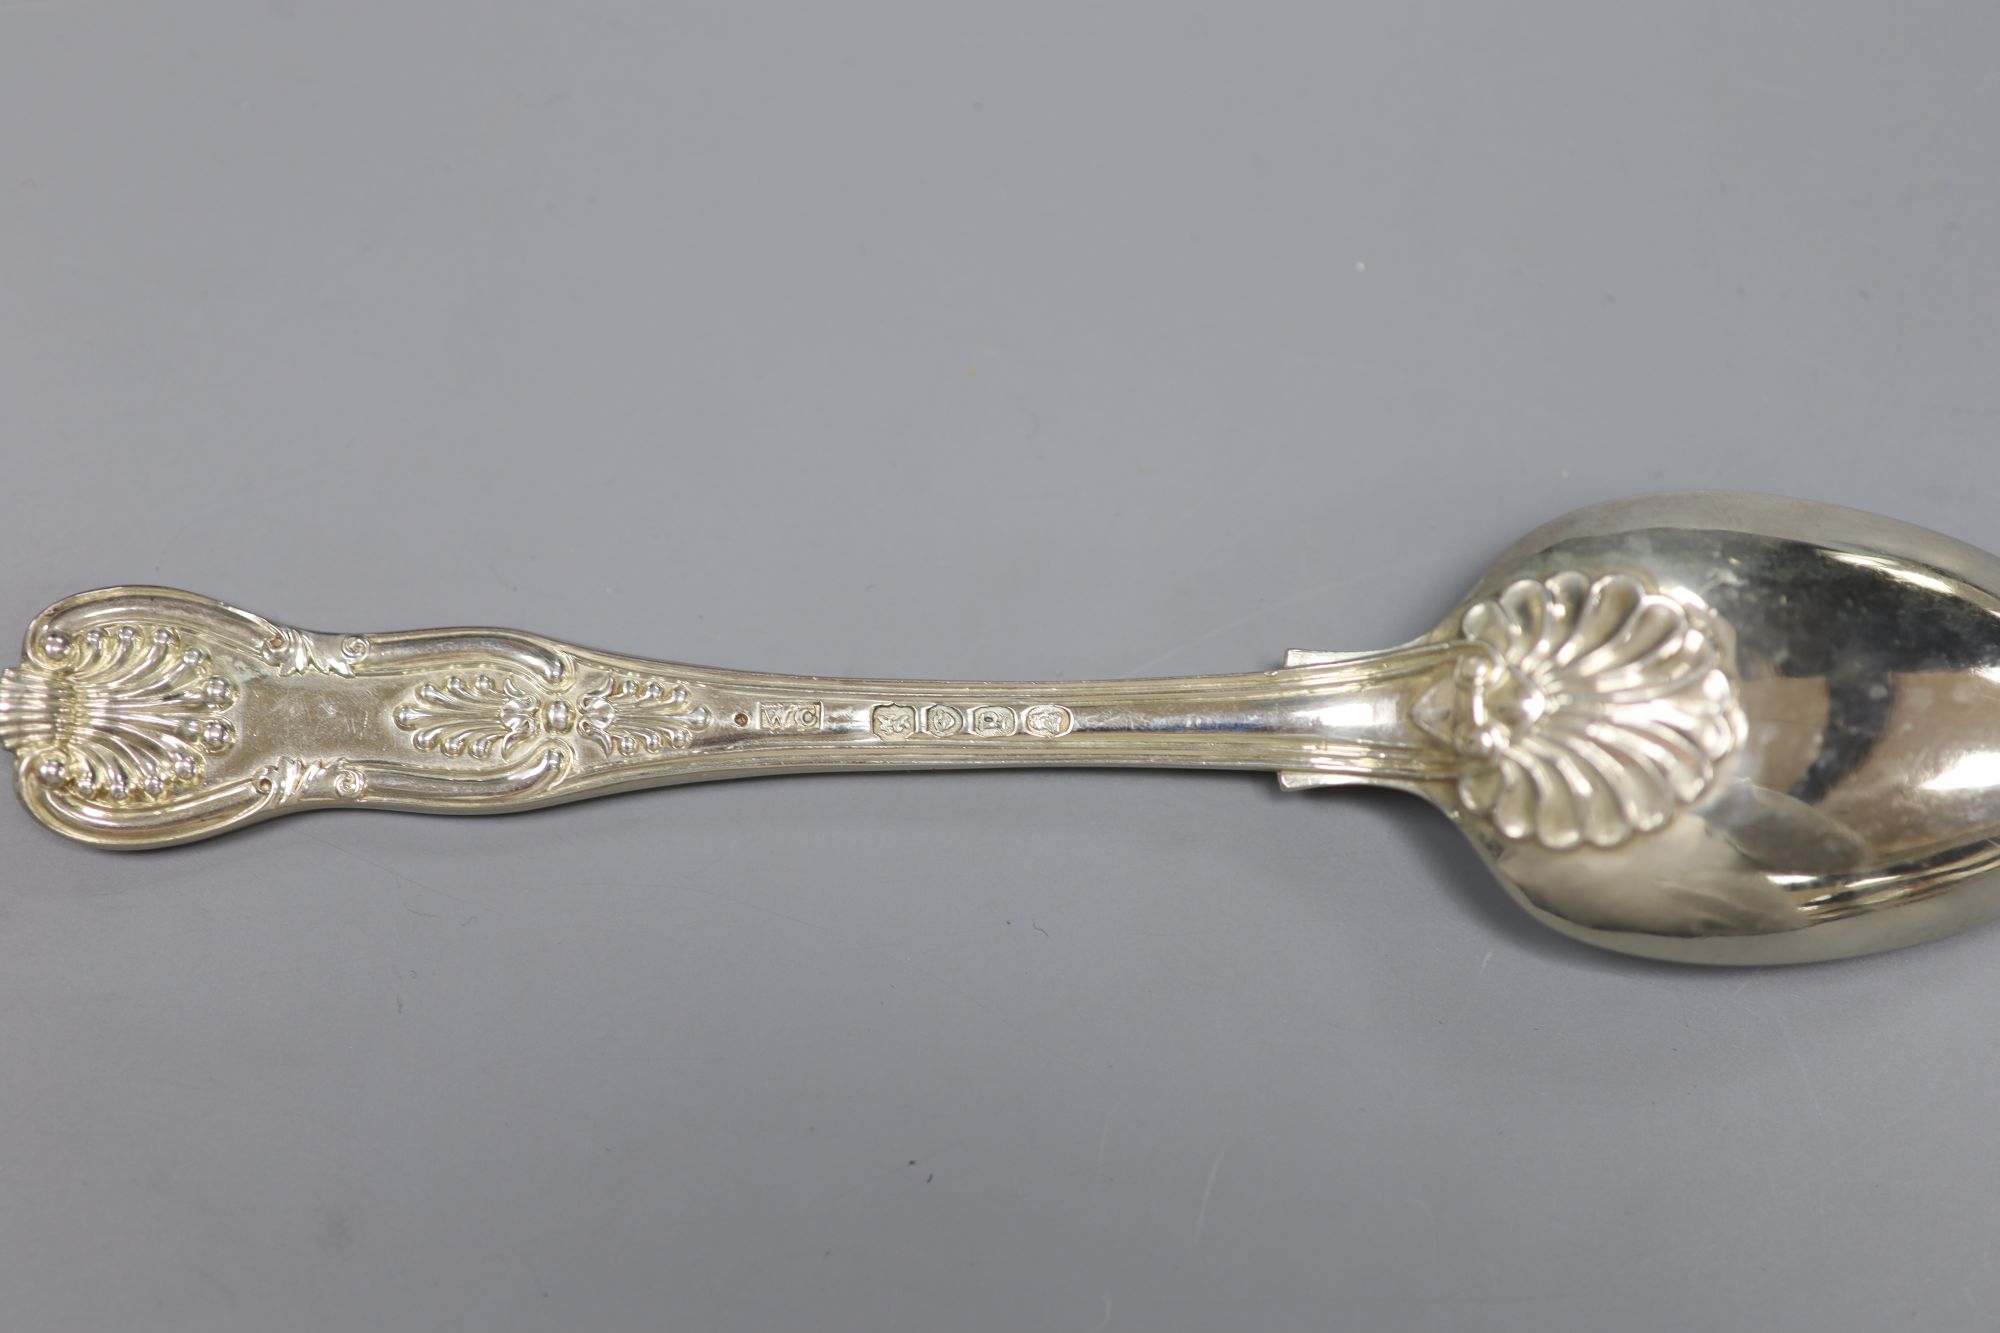 A set of four William IV silver Kings pattern dessert spoons, William Chawner II, London, 1830, 7.8oz.